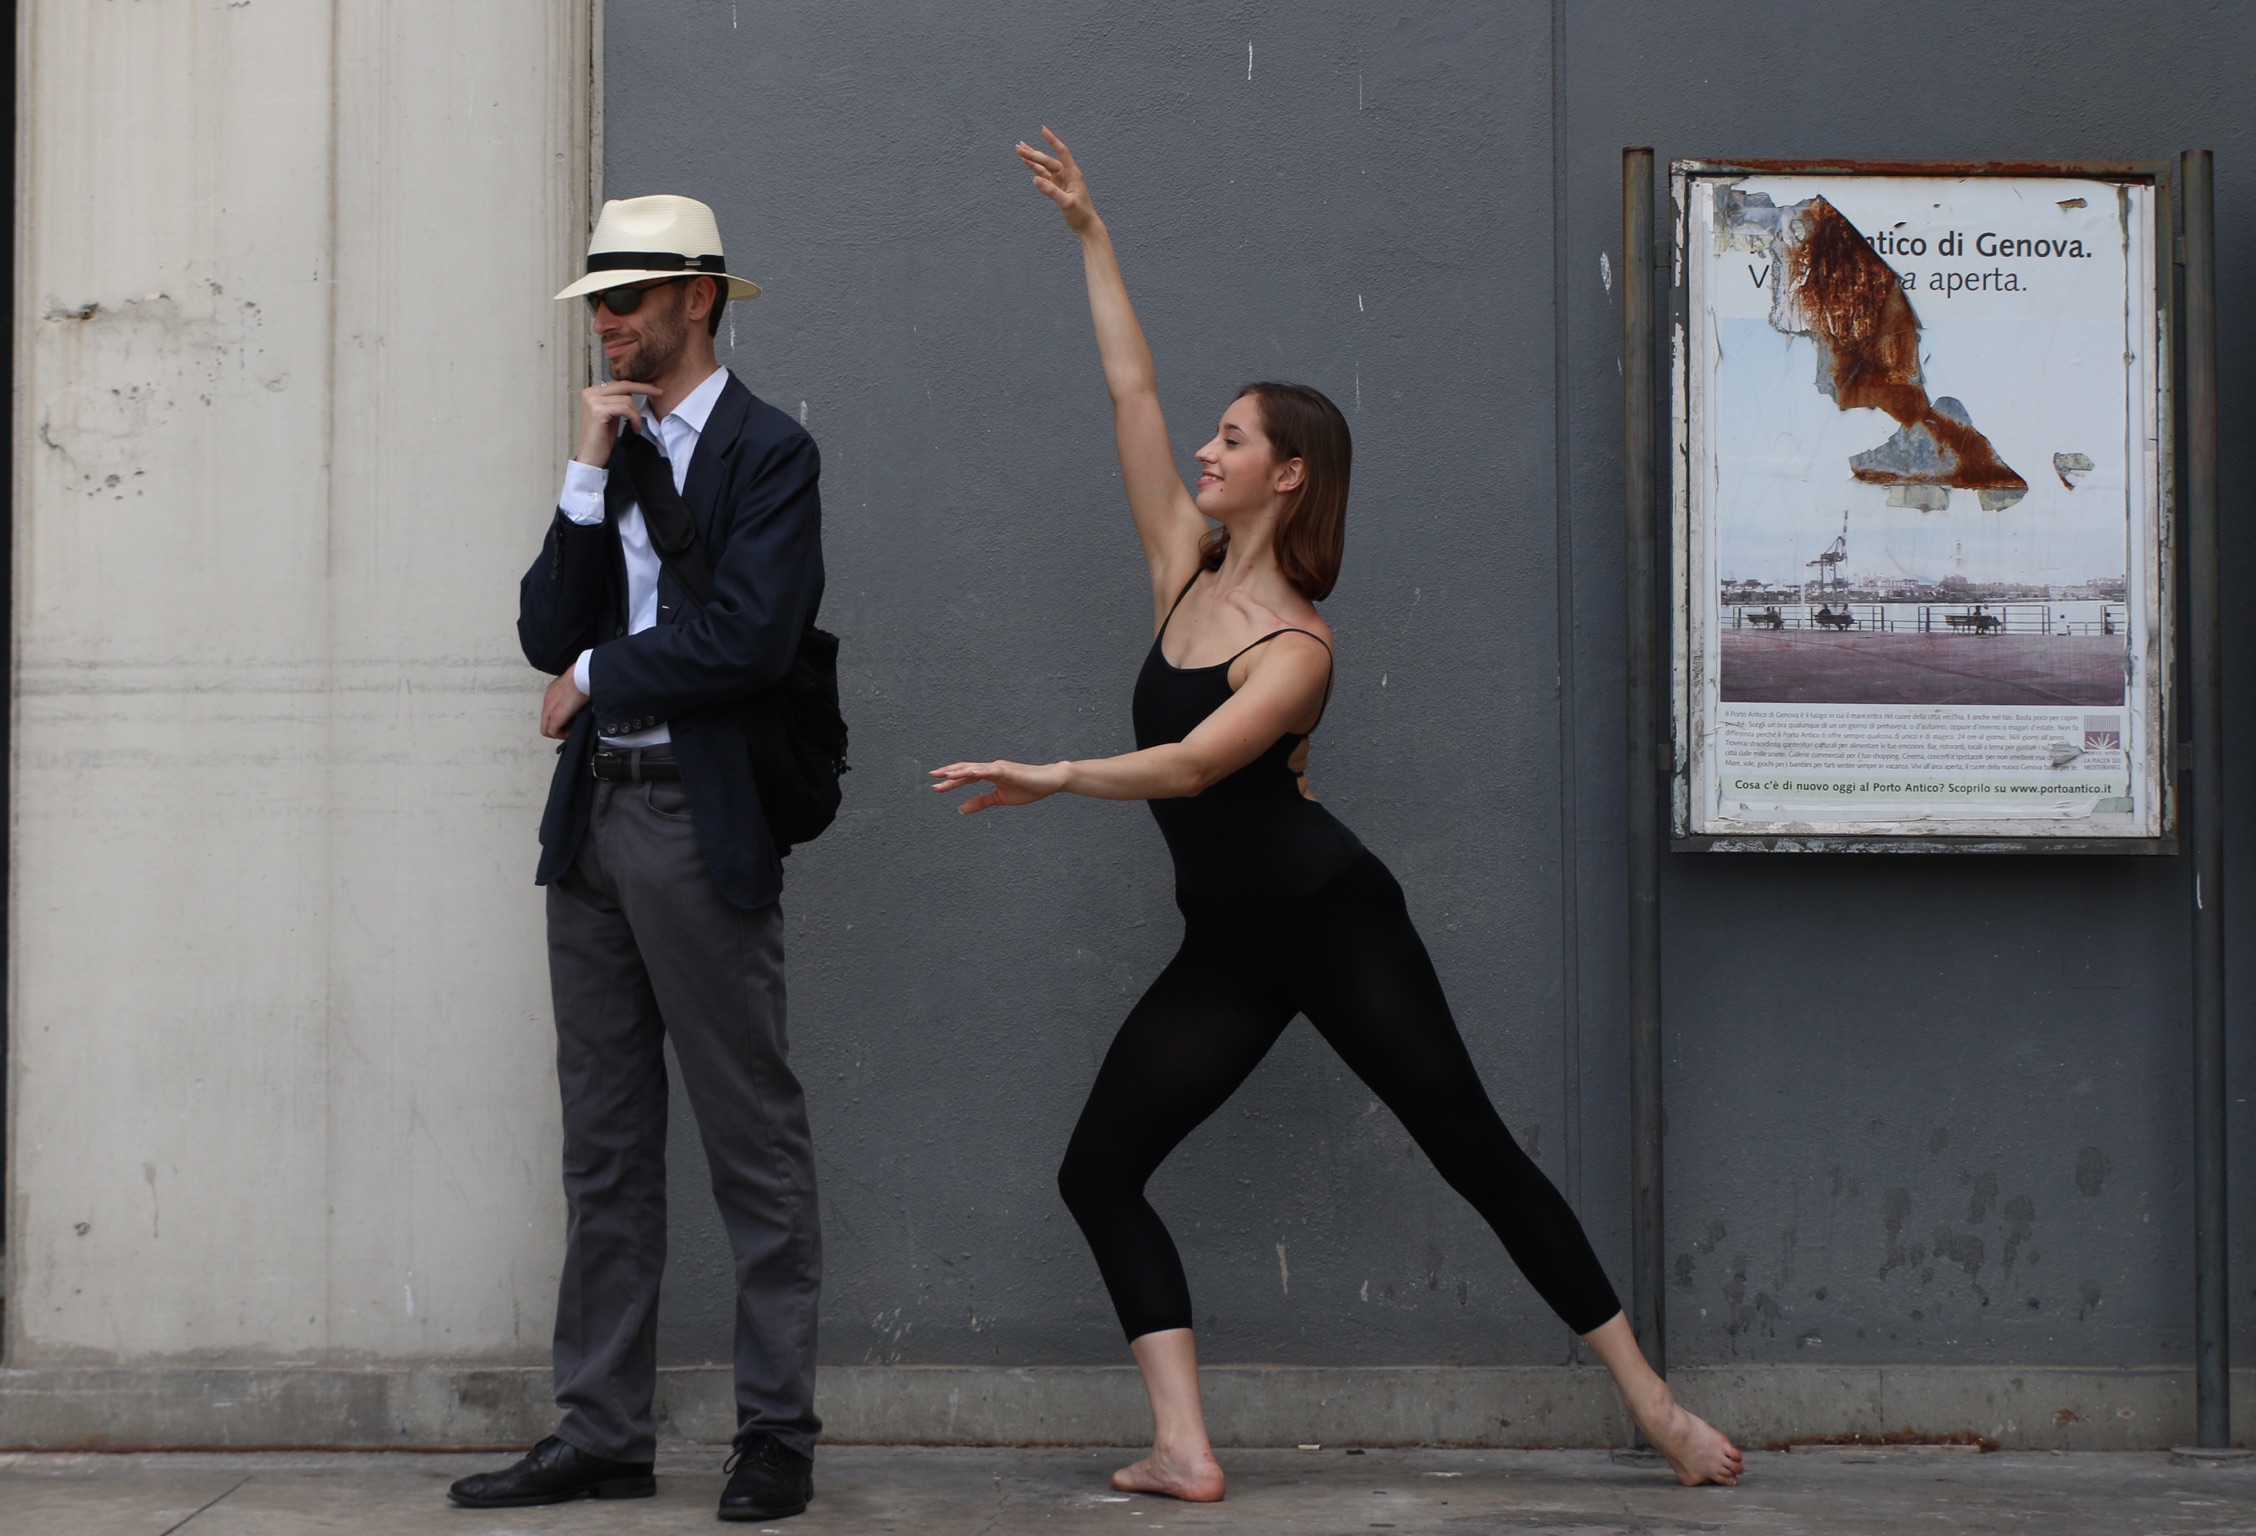 Dancer and the passerby...